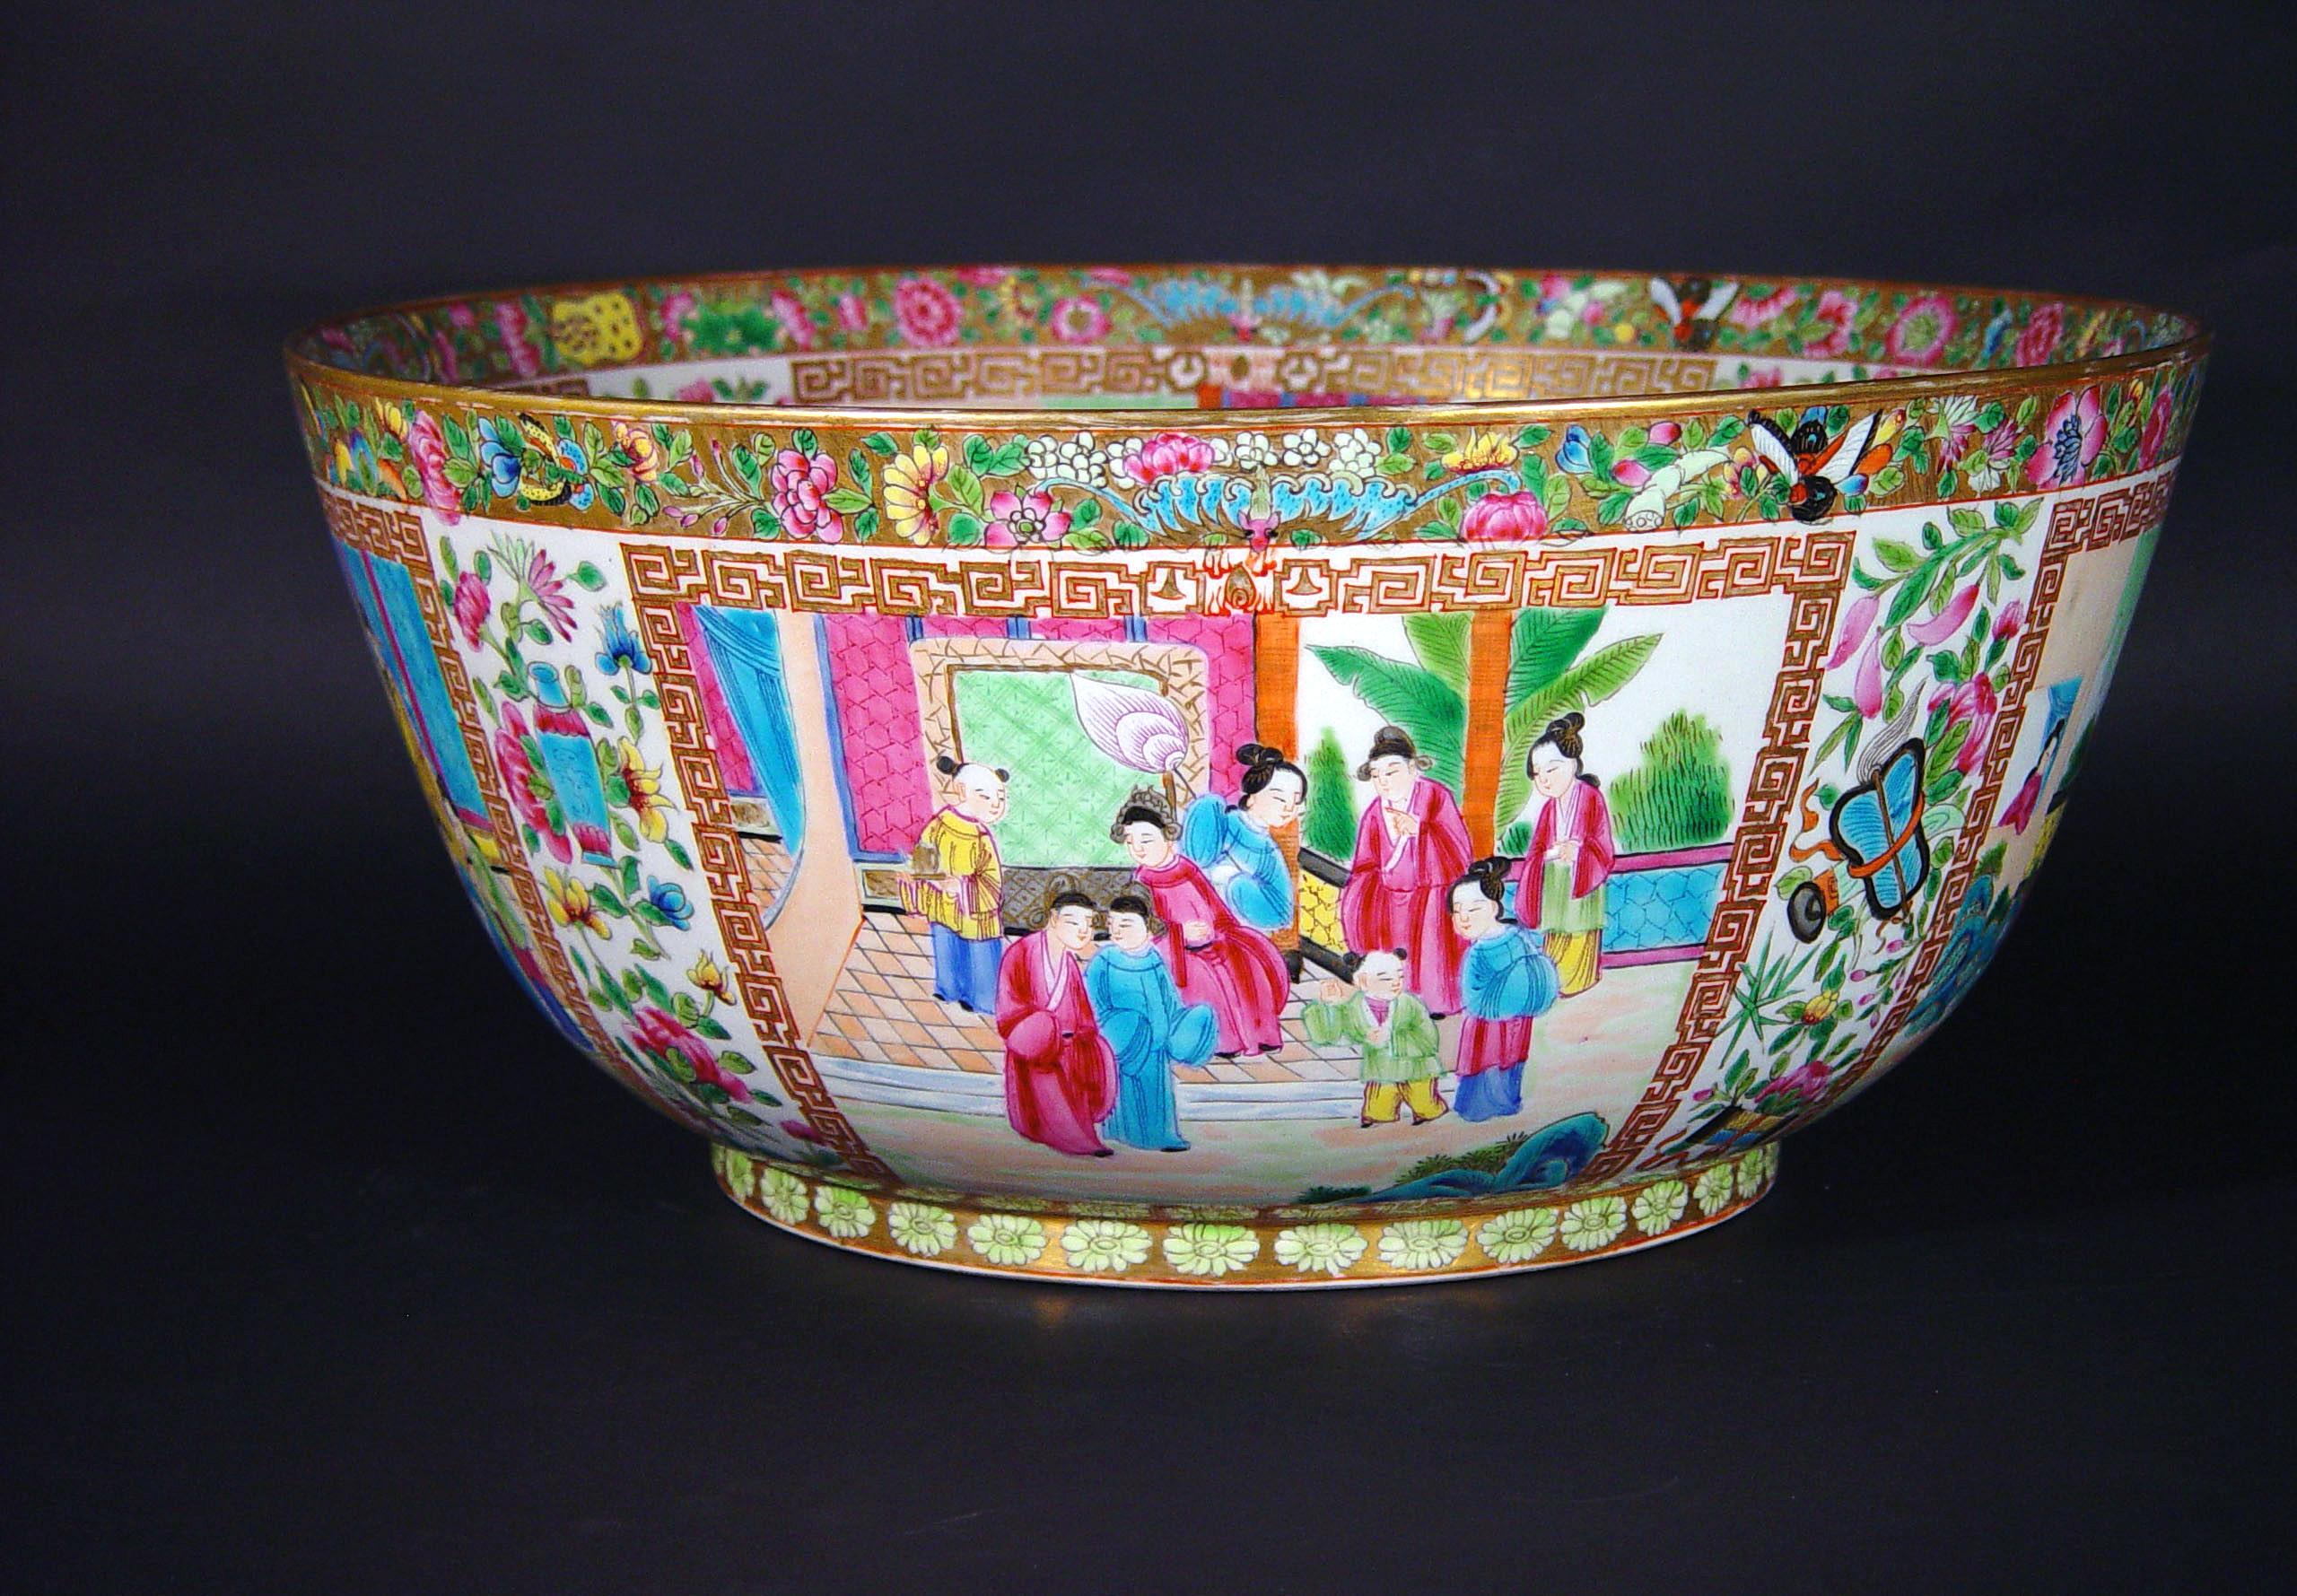 Massive Rose Canton Porcelain Punch bowl,
Edme Samson et Cie, Paris,
circa 1880

The massive beautiful bowl with unusual steep sides is painted all-over in a rose canton Famille rose design. The outside has five large panels painted with garden